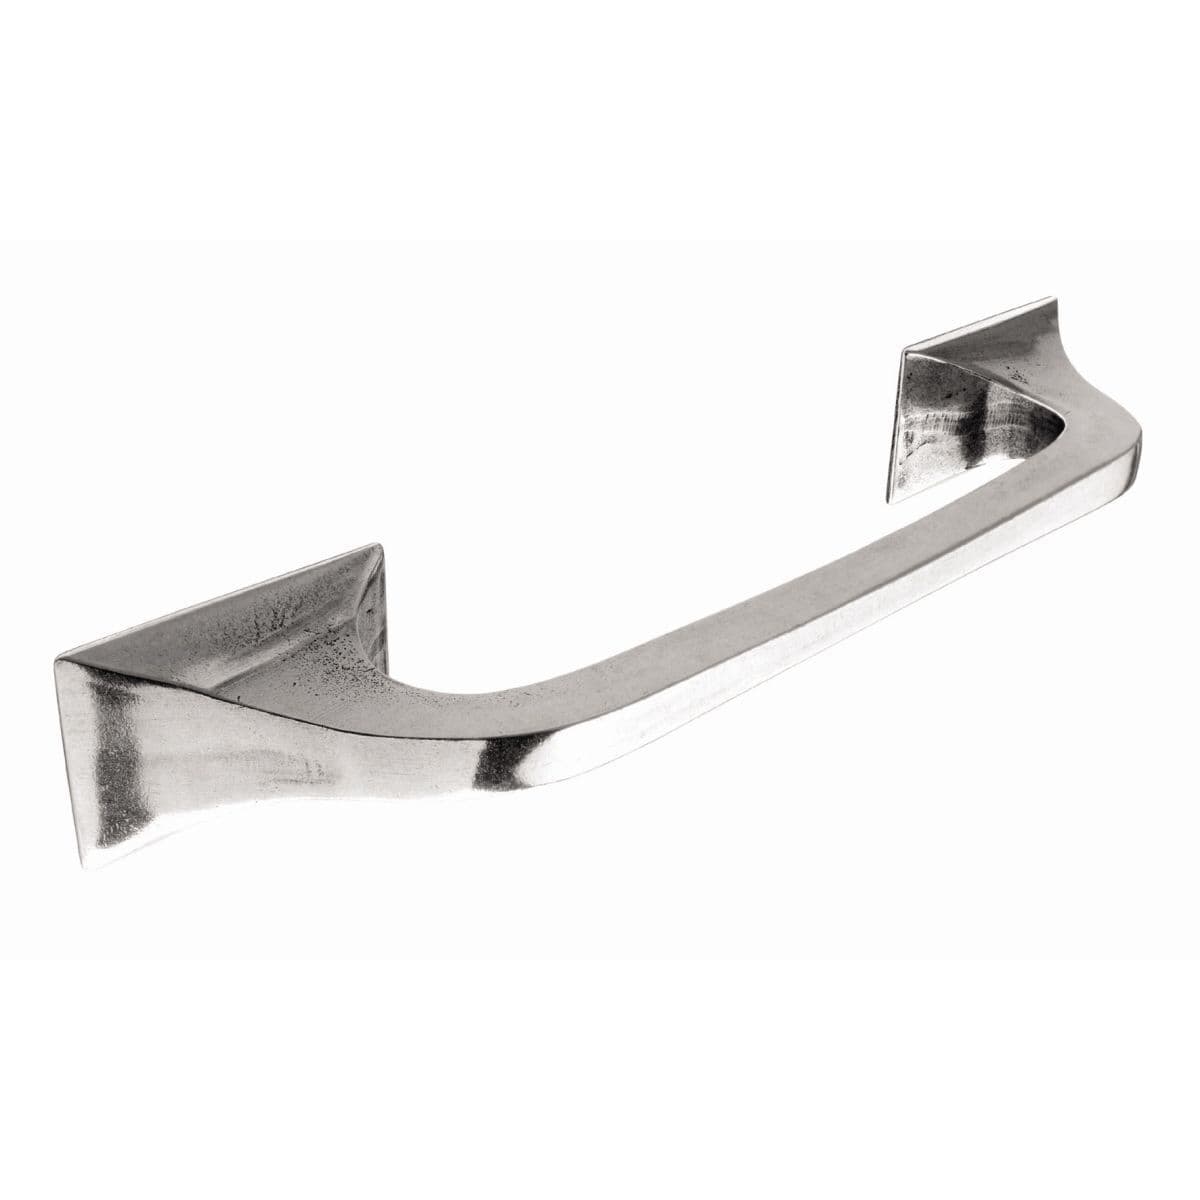 WAVERLEY D Cupboard Handle - 160mm h/c size - RAW PEWTER finish (PWS H580.160.PE)